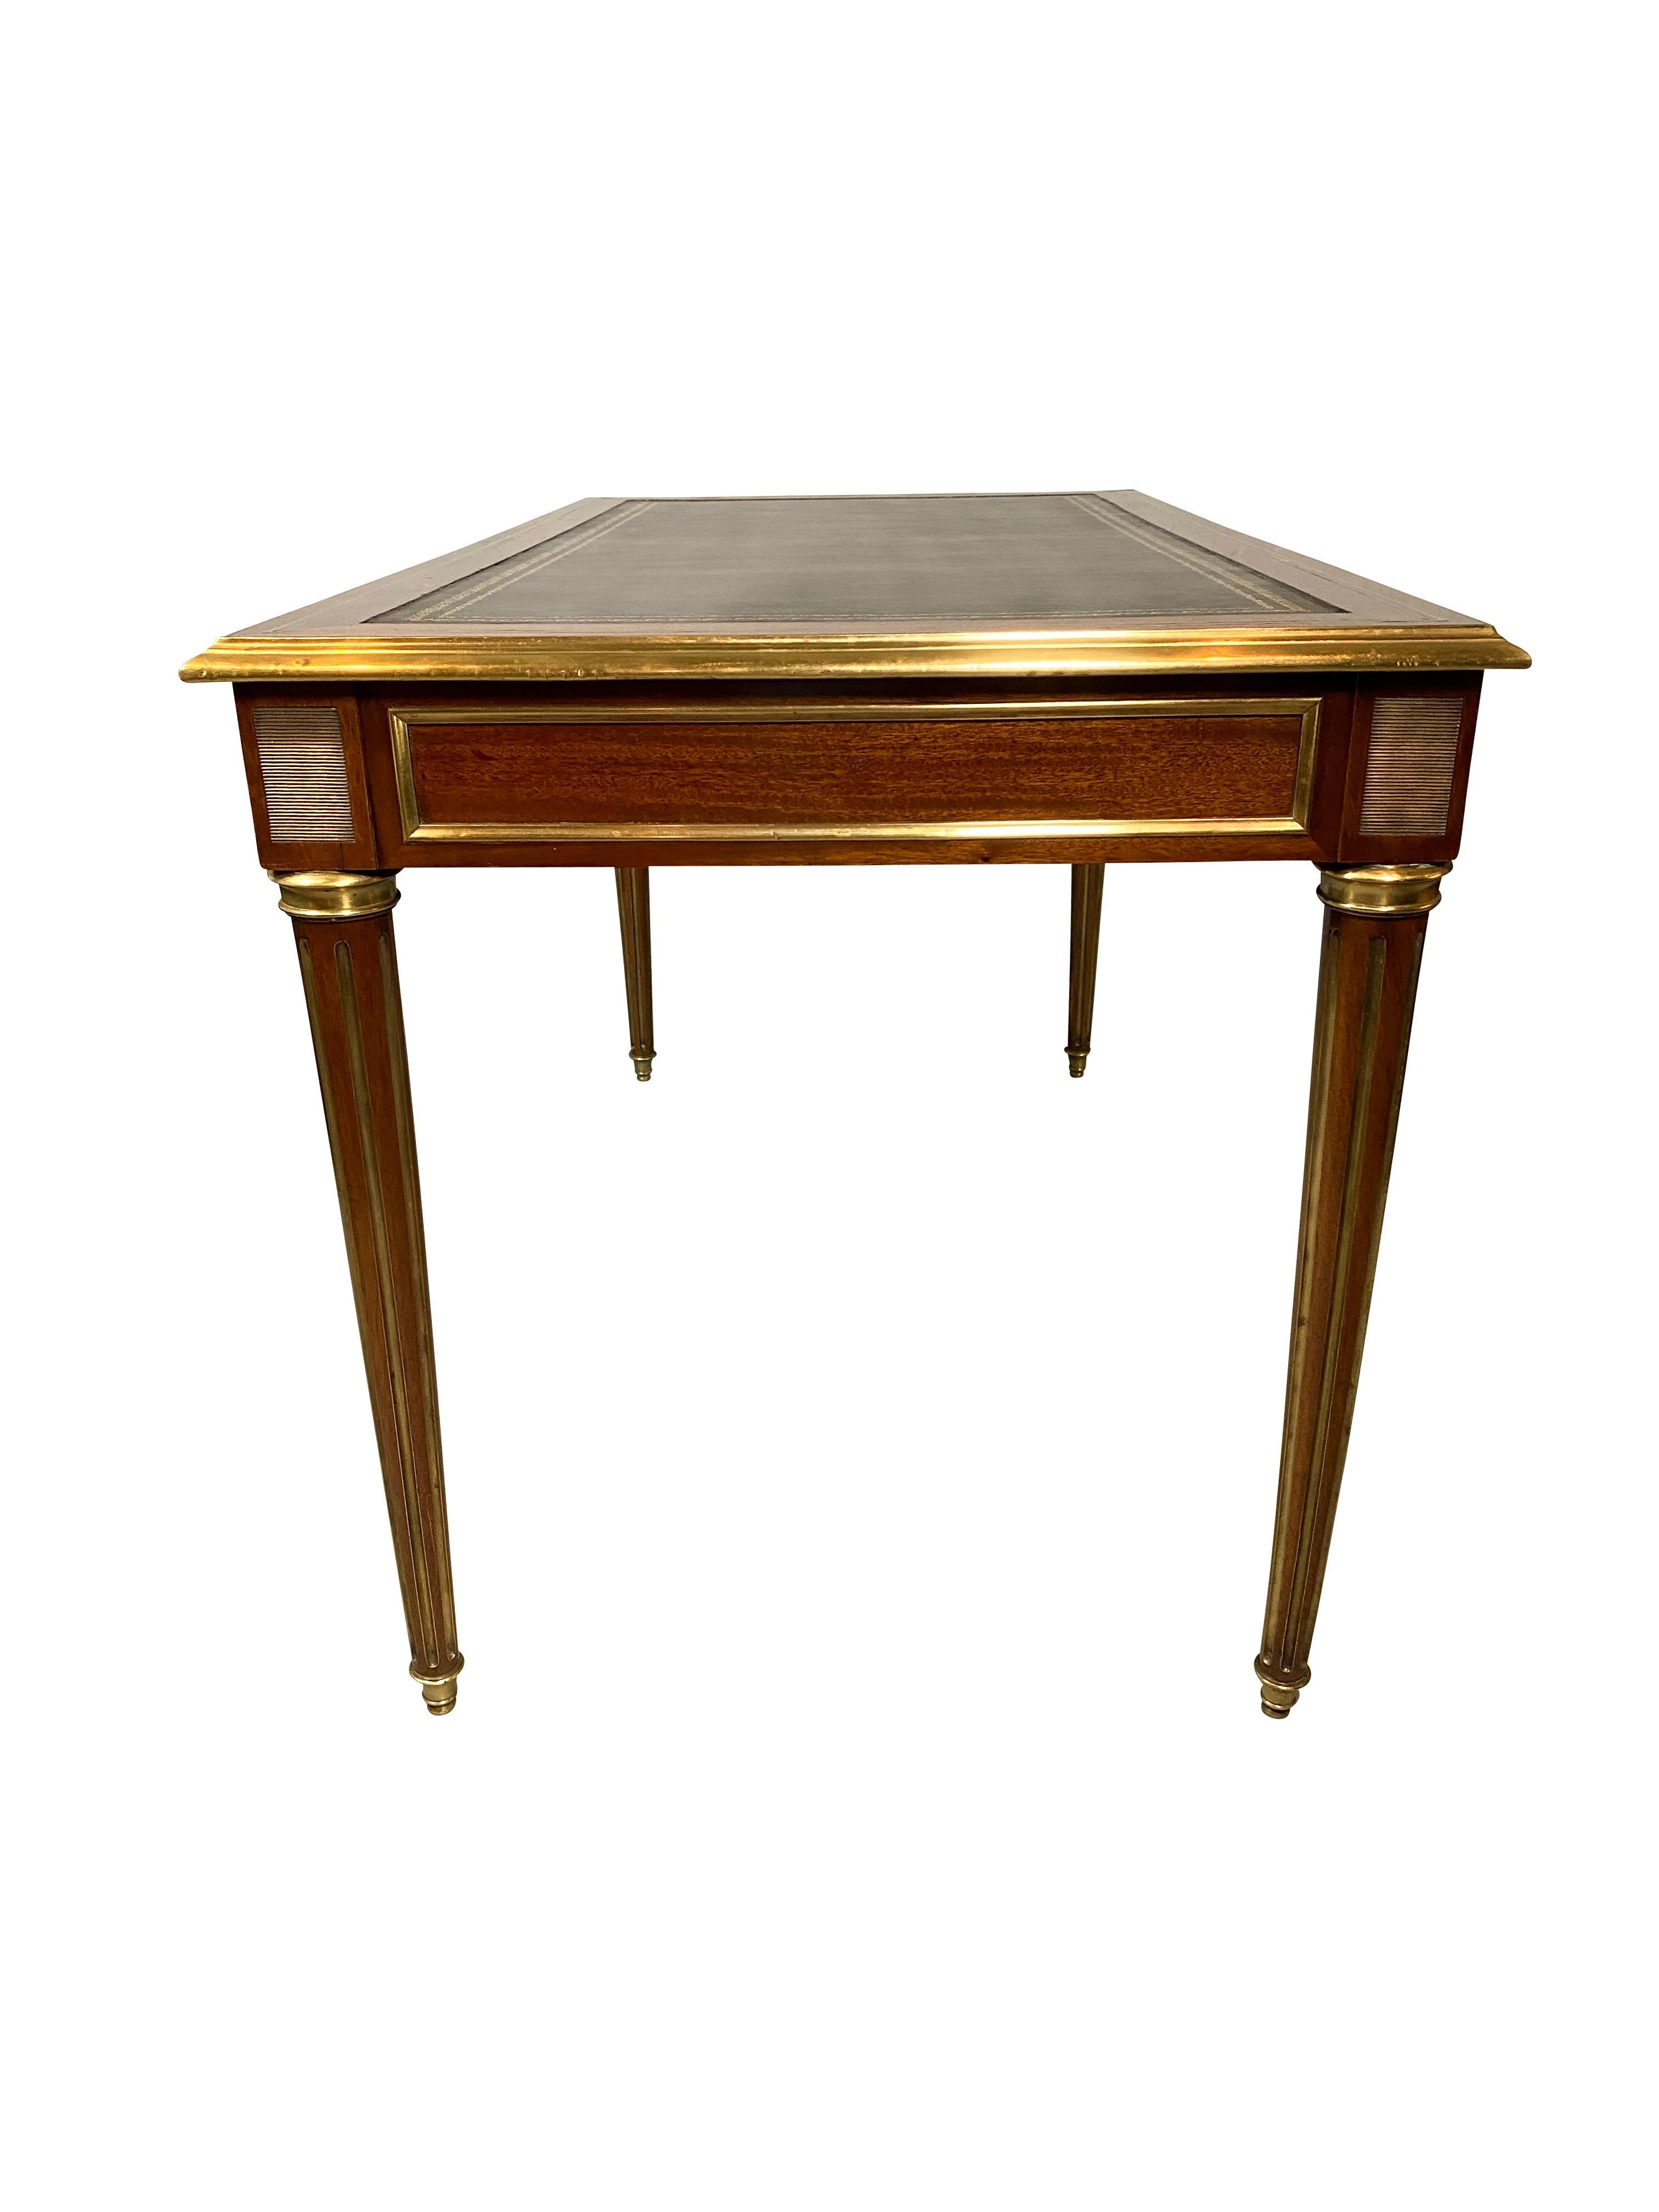 19th Century Directoire Style Mahogany and Brass Inlaid Writing Table